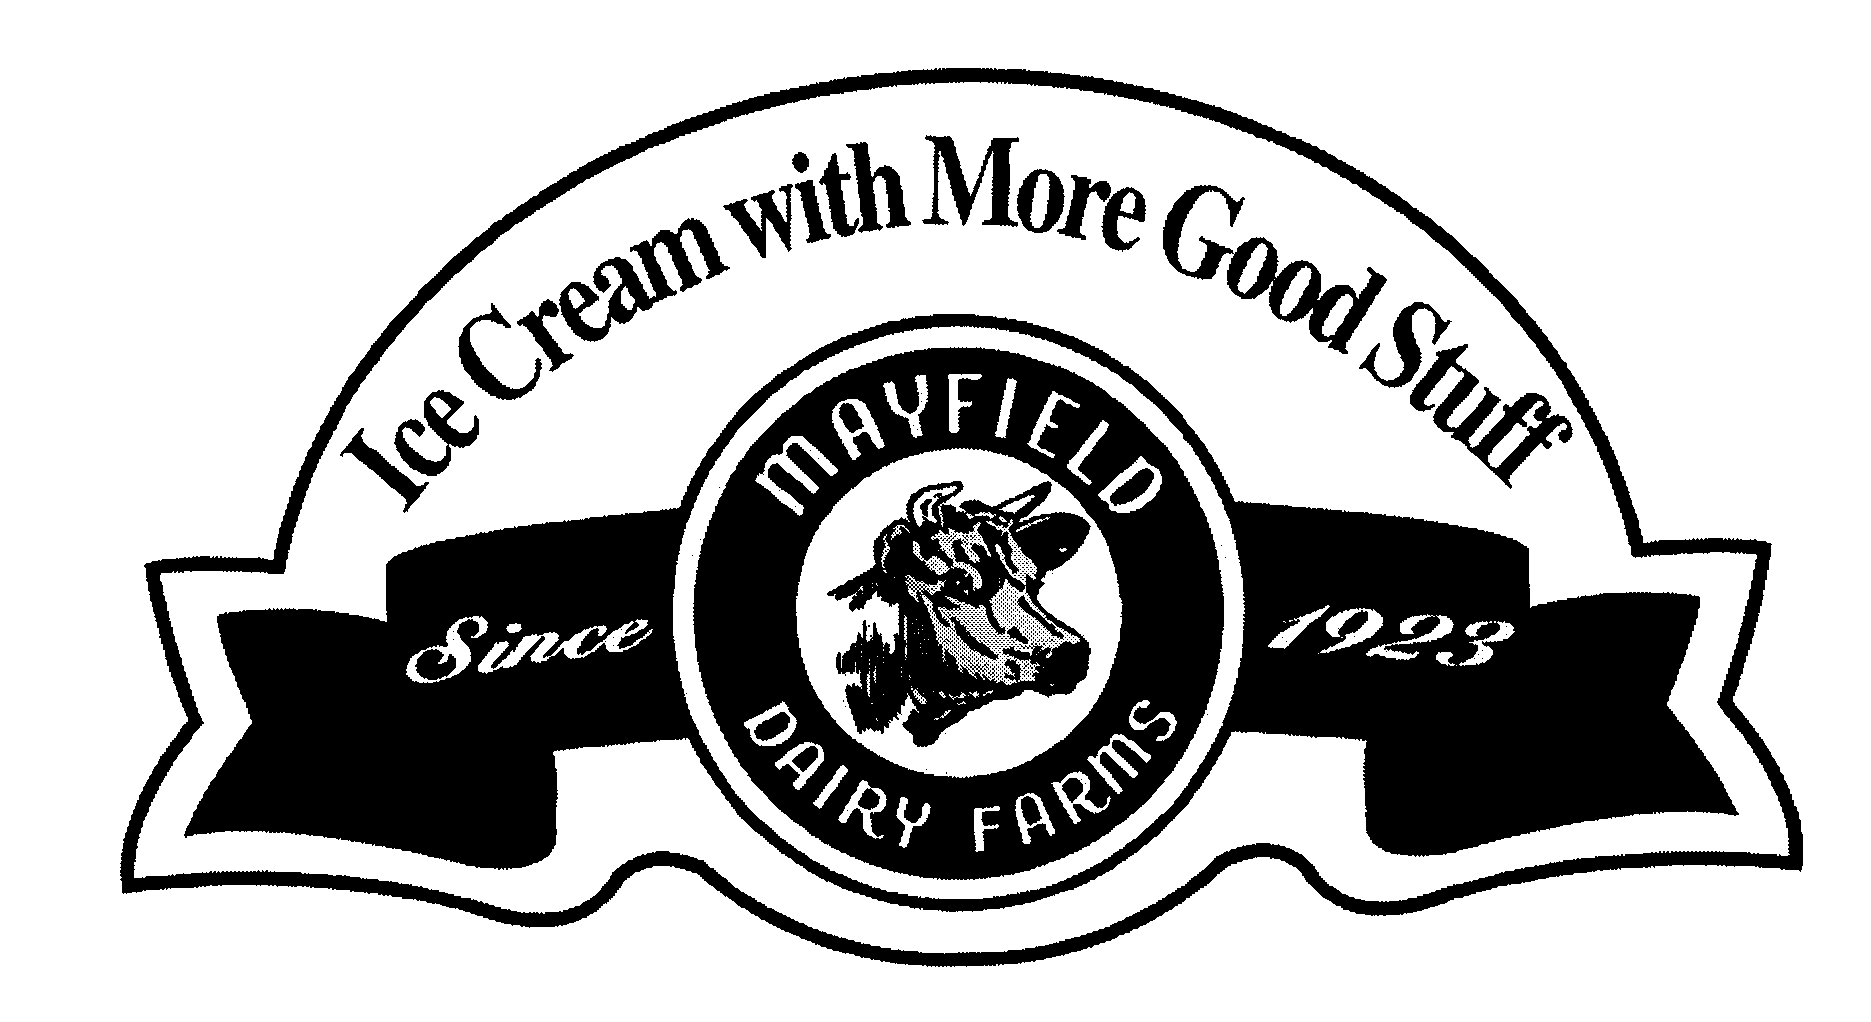 Trademark Logo ICE CREAM WITH MORE GOOD STUFF MAYFIELDDAIRY FARMS SINCE 1923